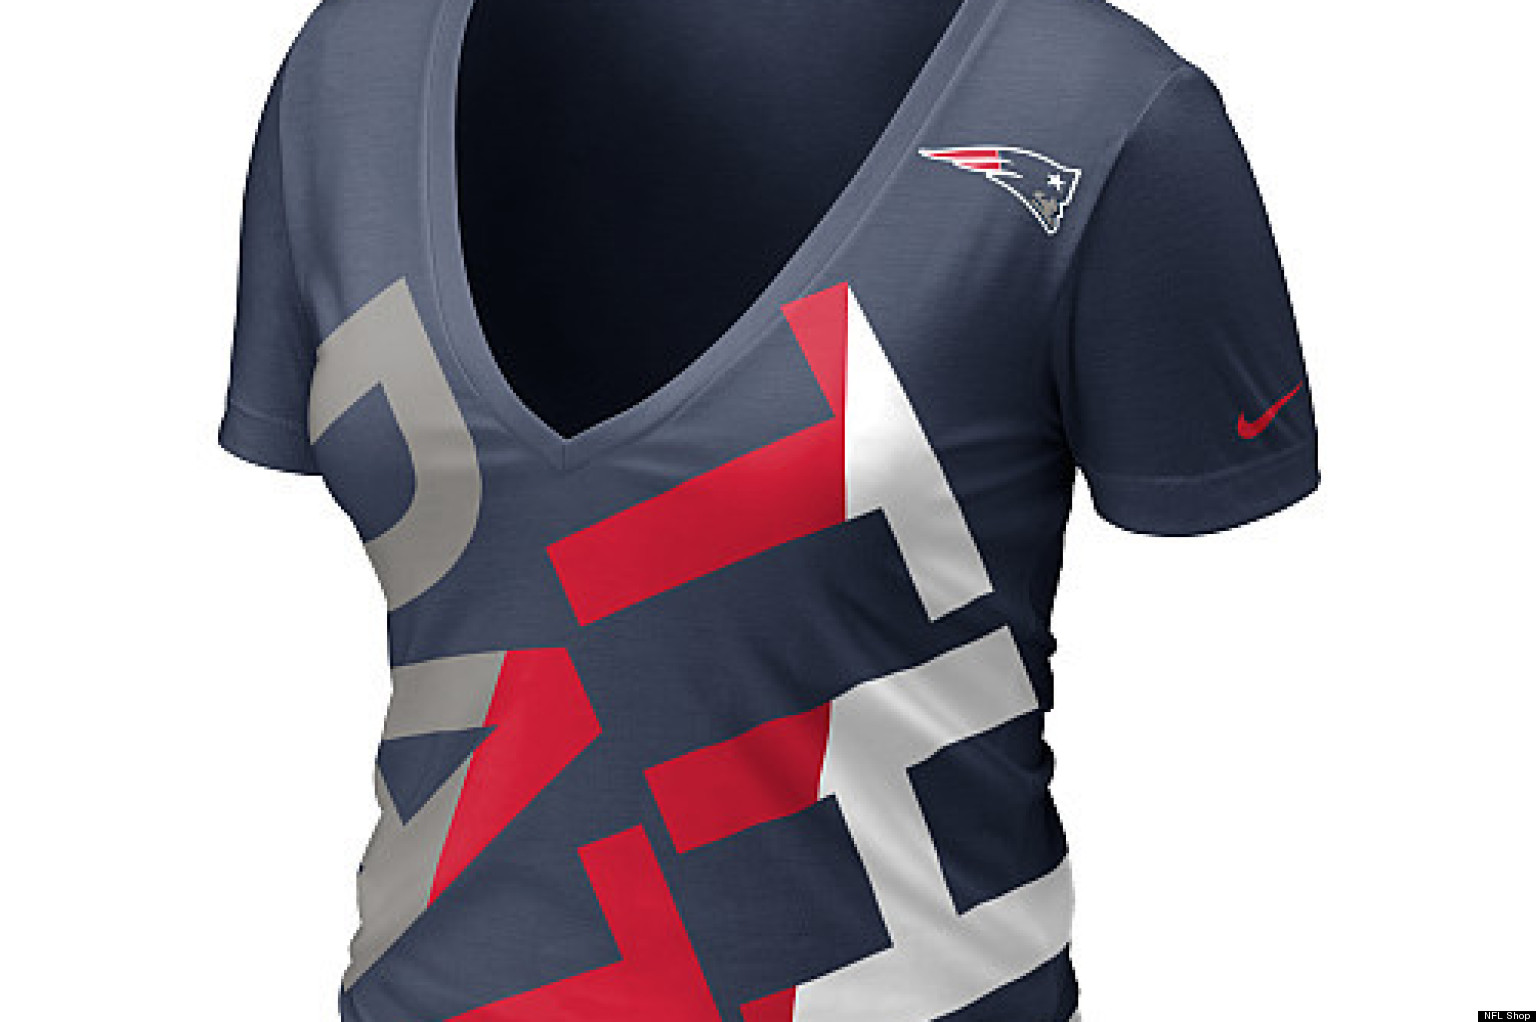 NFL Style Series: NFL's Revamped Women's Clothing Line (PHOTOS)